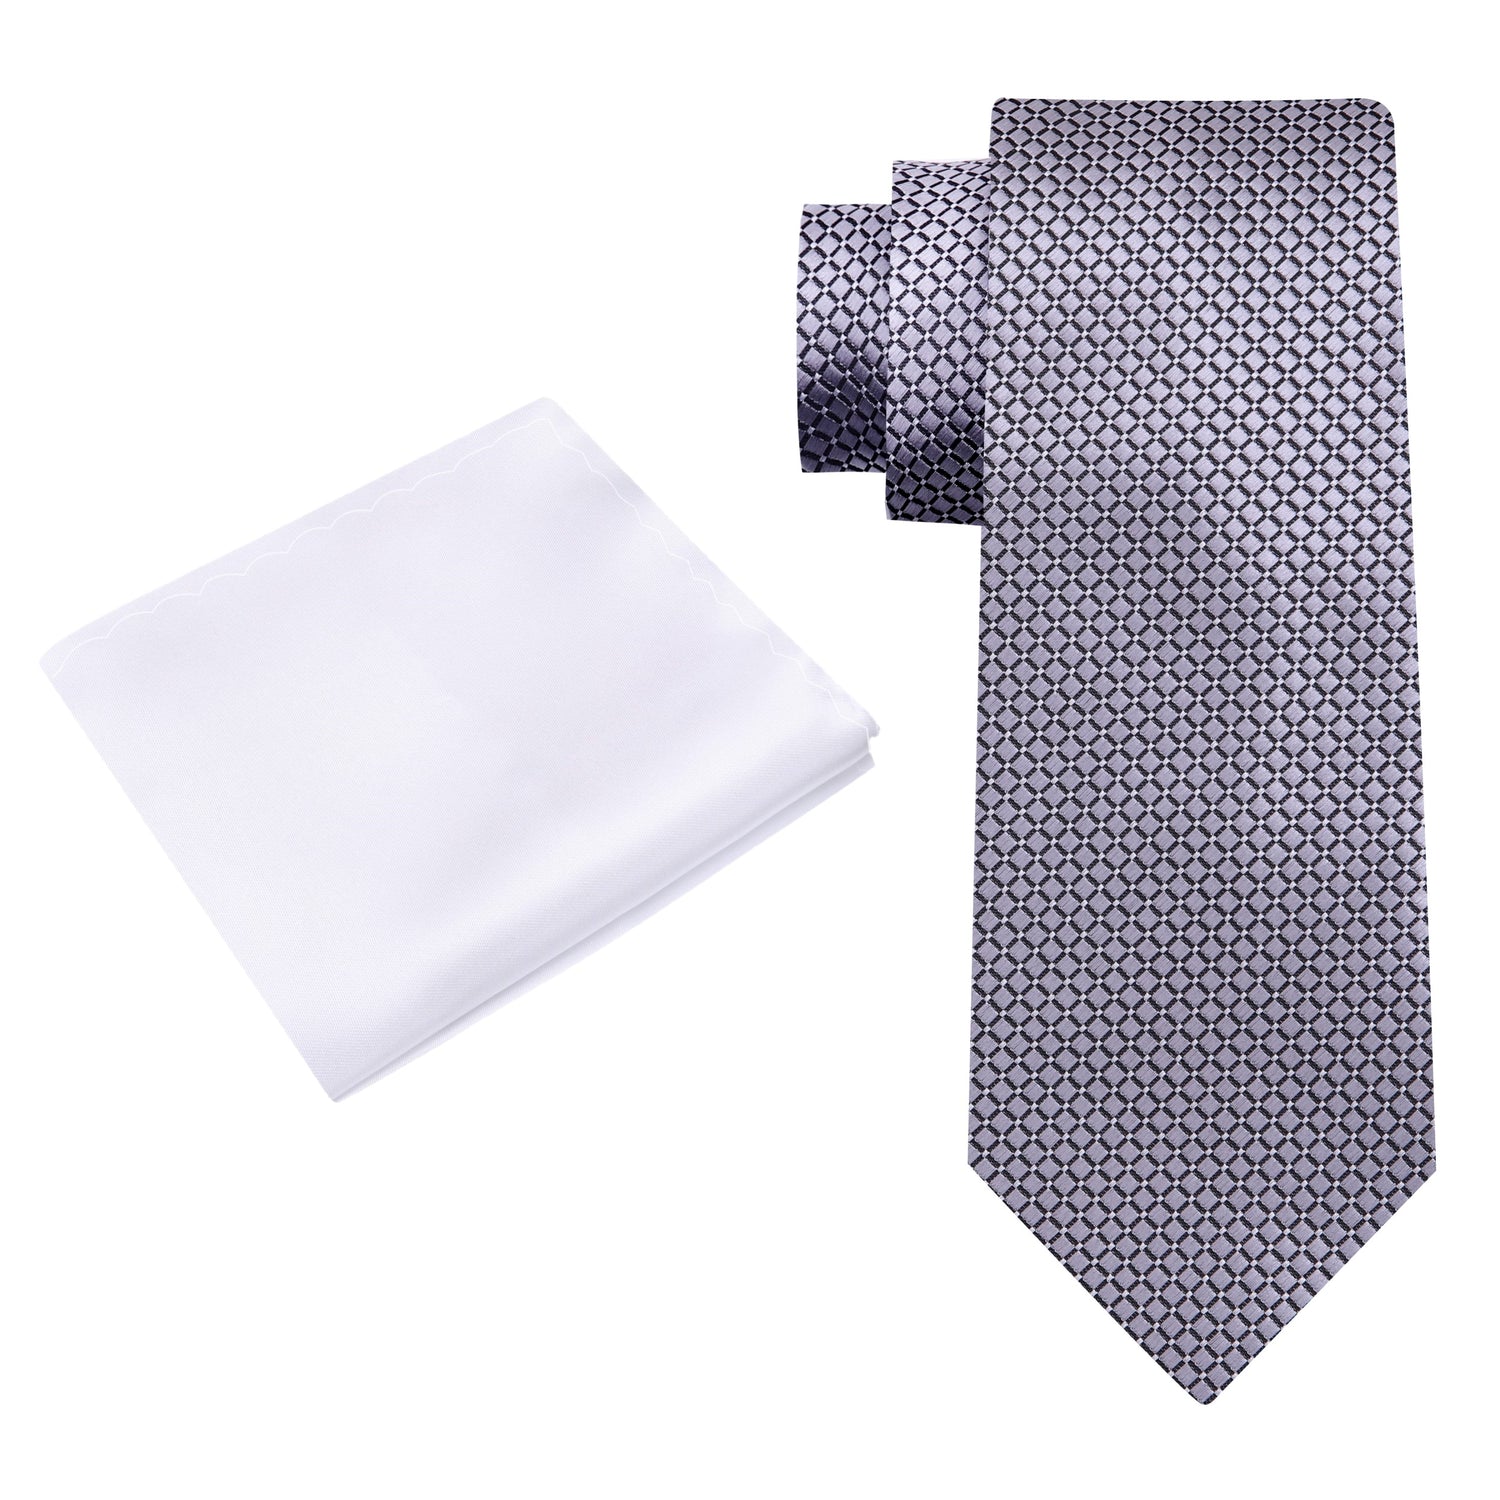 Alt View: A Light Grey Small Geometric Diamond With Small Dots Pattern Silk Necktie With Solid White Pocket Square